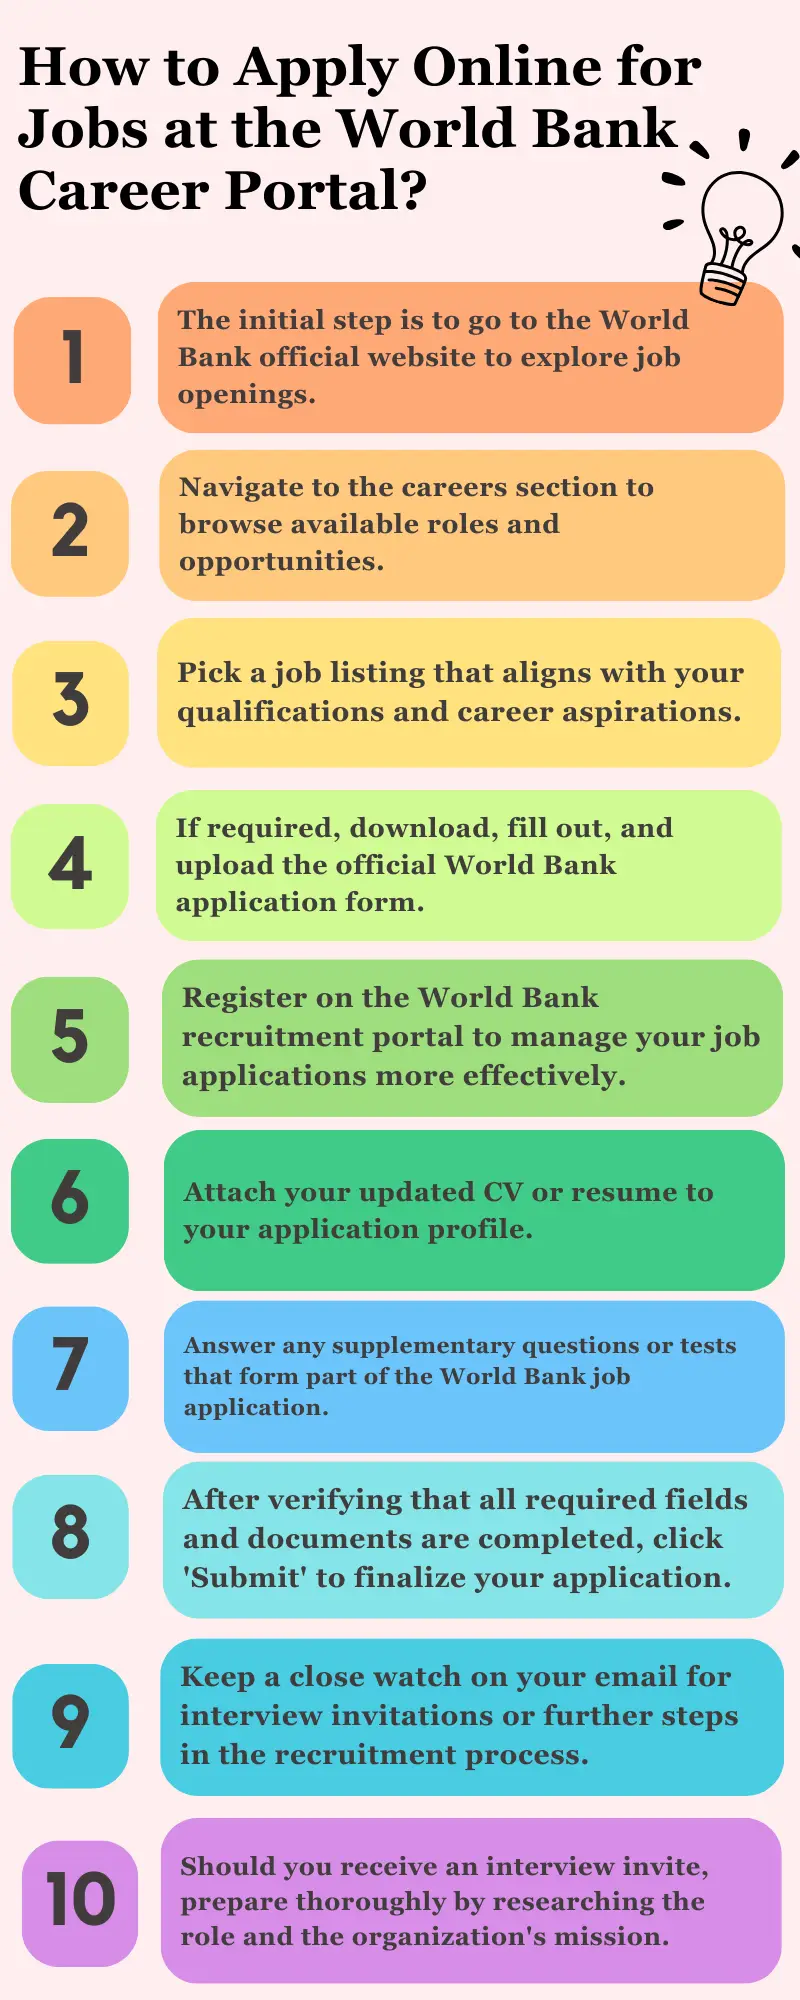 How to Apply Online for Jobs at the World Bank Career Portal?